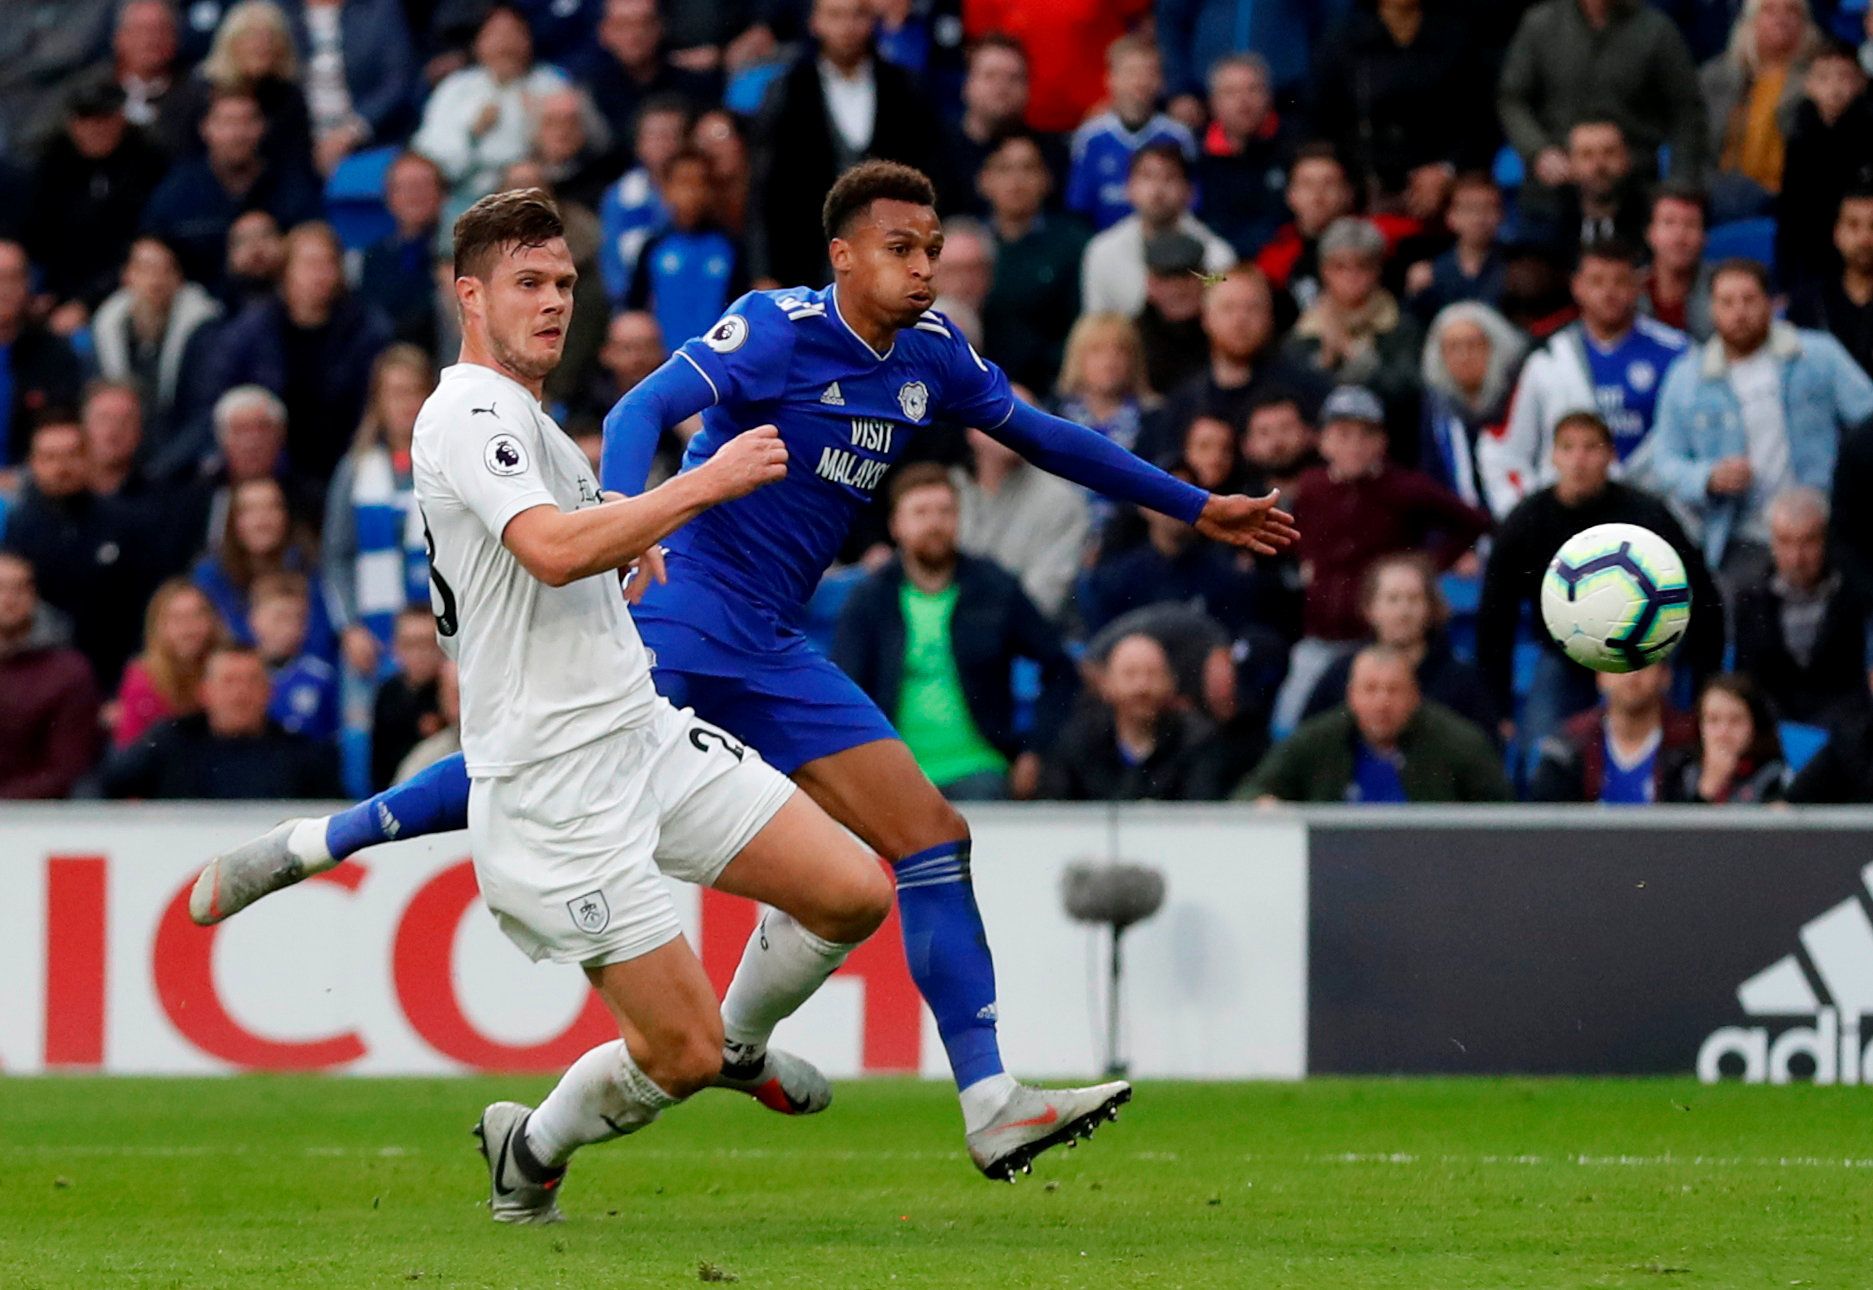 Soccer Football - Premier League - Cardiff City v Burnley - Cardiff City Stadium, Cardiff, Britain - September 30, 2018  Cardiff City's Josh Murphy shoots at goal         Action Images via Reuters/Matthew Childs  EDITORIAL USE ONLY. No use with unauthorized audio, video, data, fixture lists, club/league logos or "live" services. Online in-match use limited to 75 images, no video emulation. No use in betting, games or single club/league/player publications.  Please contact your account representa